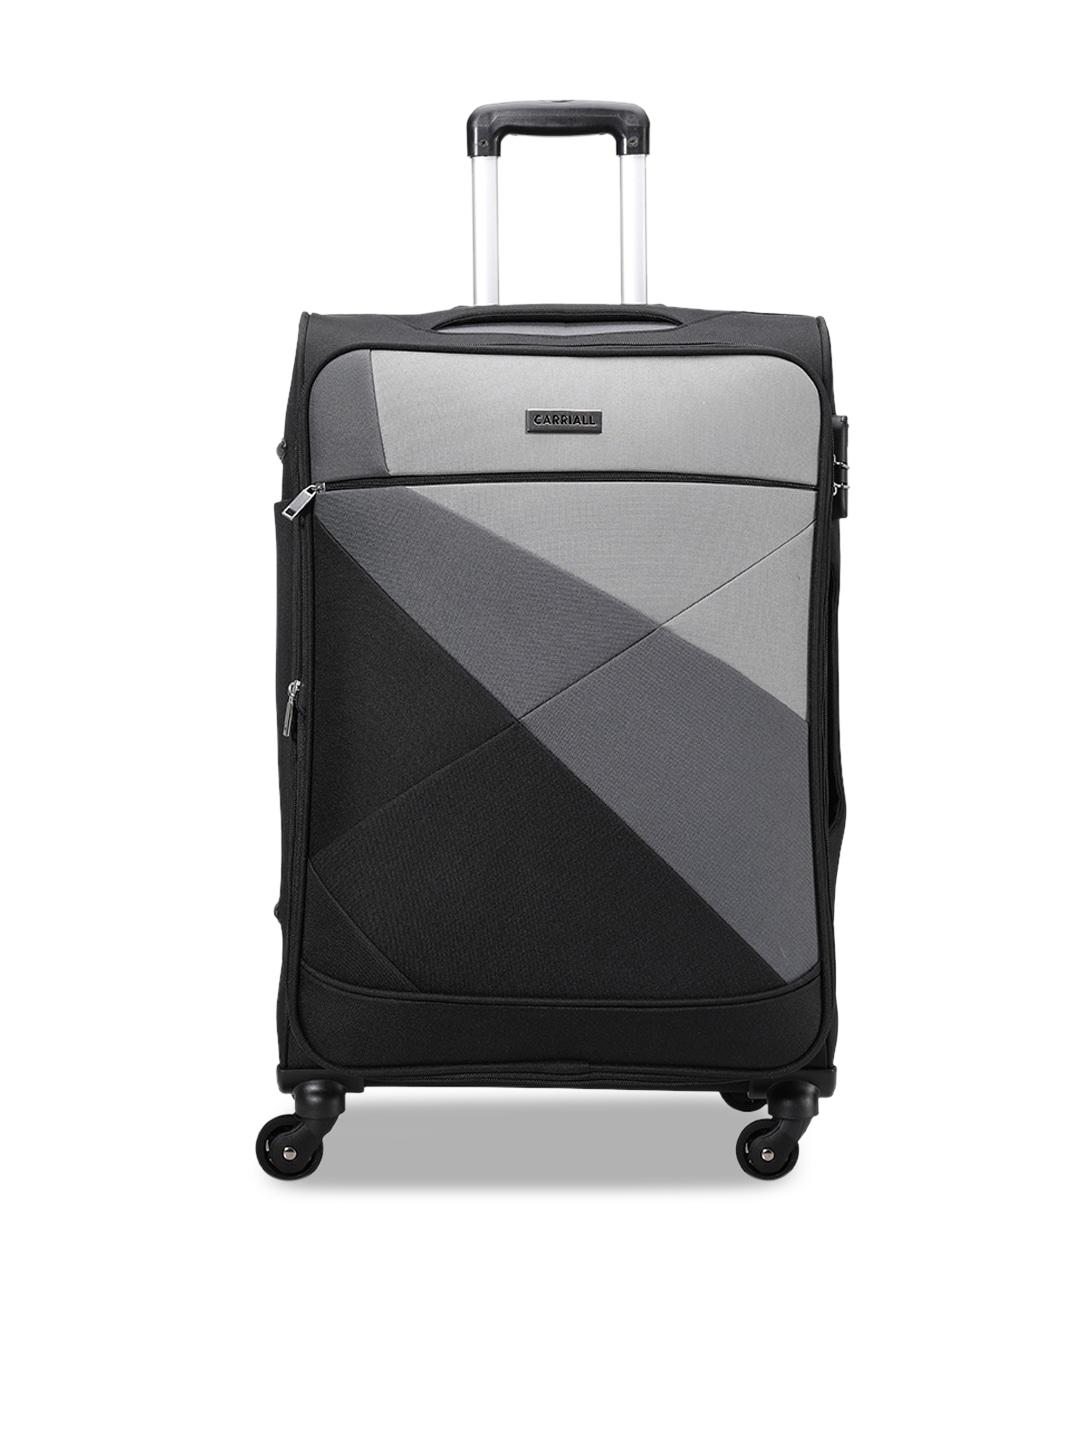 carriall black vista medium-sized check-in trolley suitcase